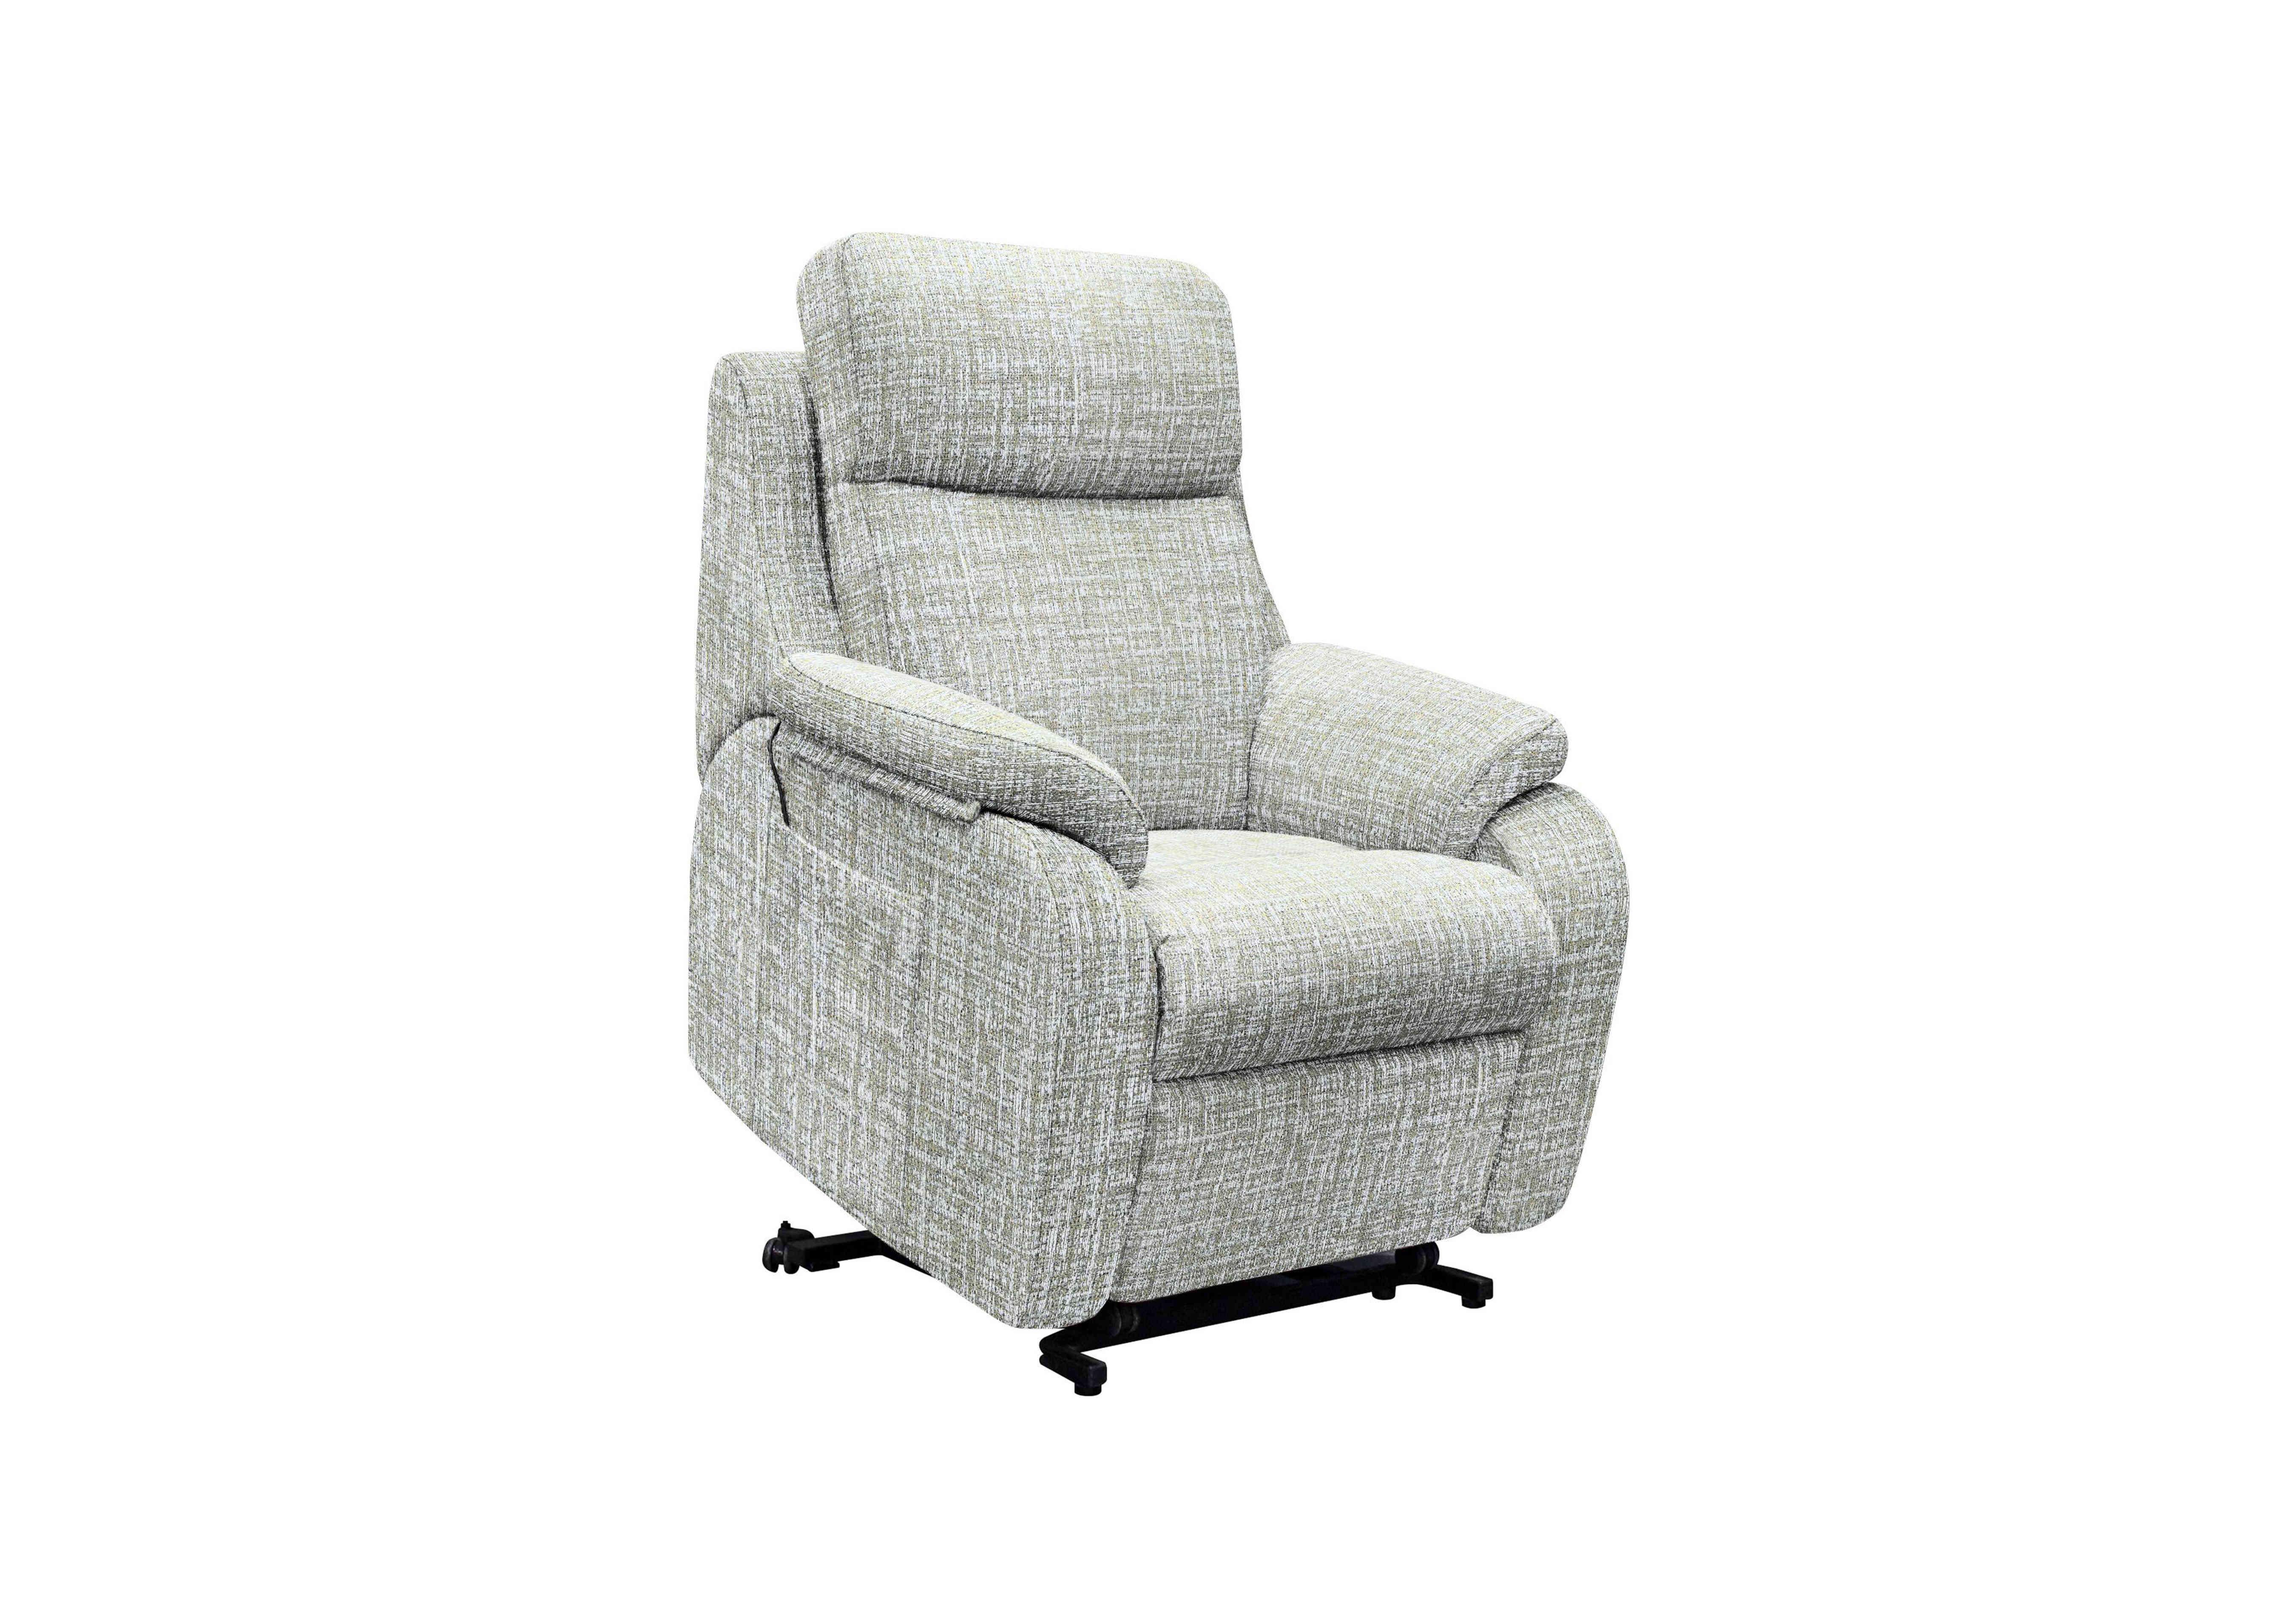 Kingsbury Small Fabric Lift and Rise Chair in B102 Shore Oatmeal on Furniture Village